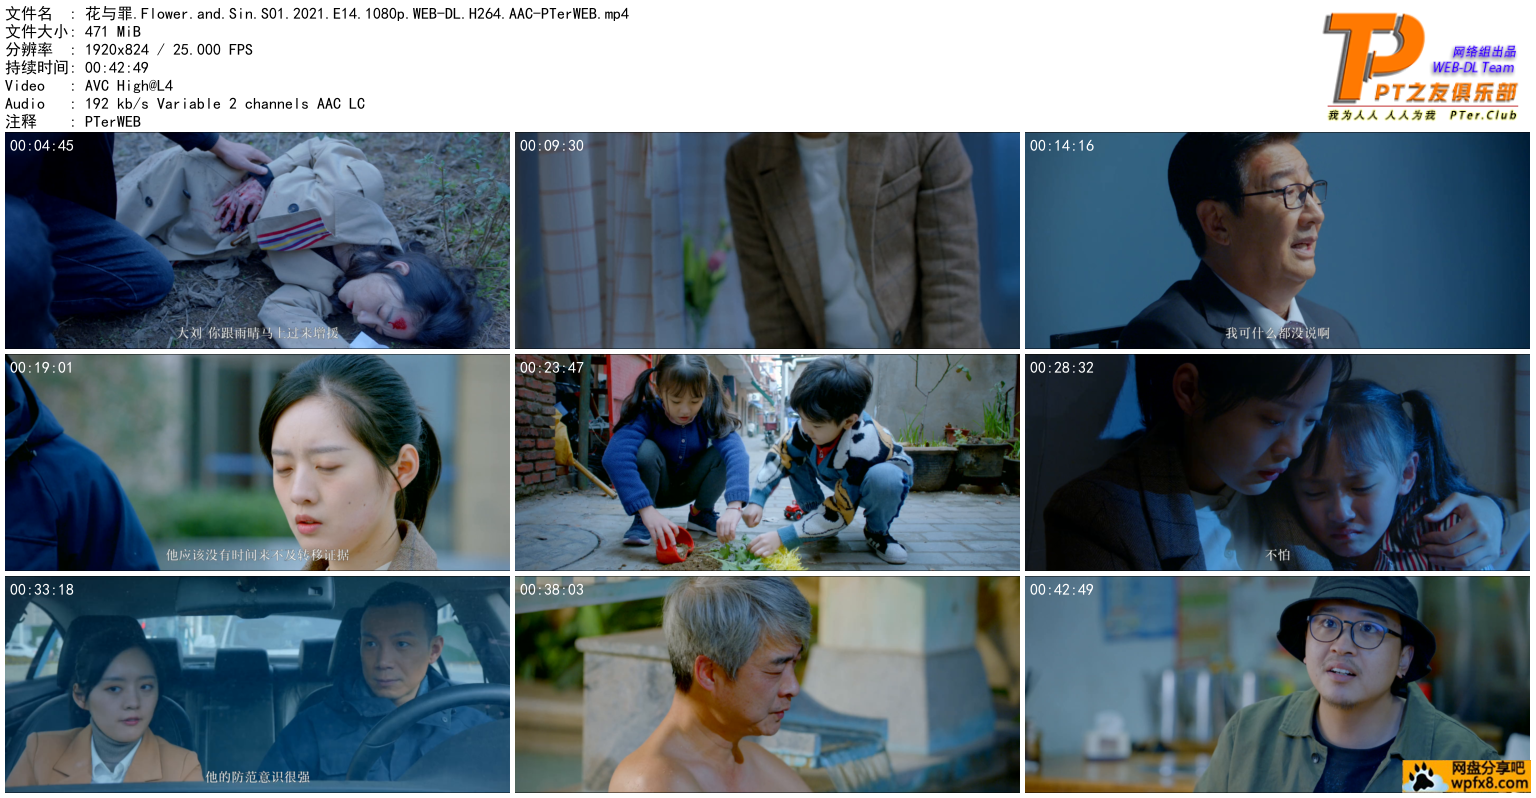 Flower.and.Sin.S01.2021.E14.1080p.WEB-DL.H264.AAC-PTerWEB.thumb.png